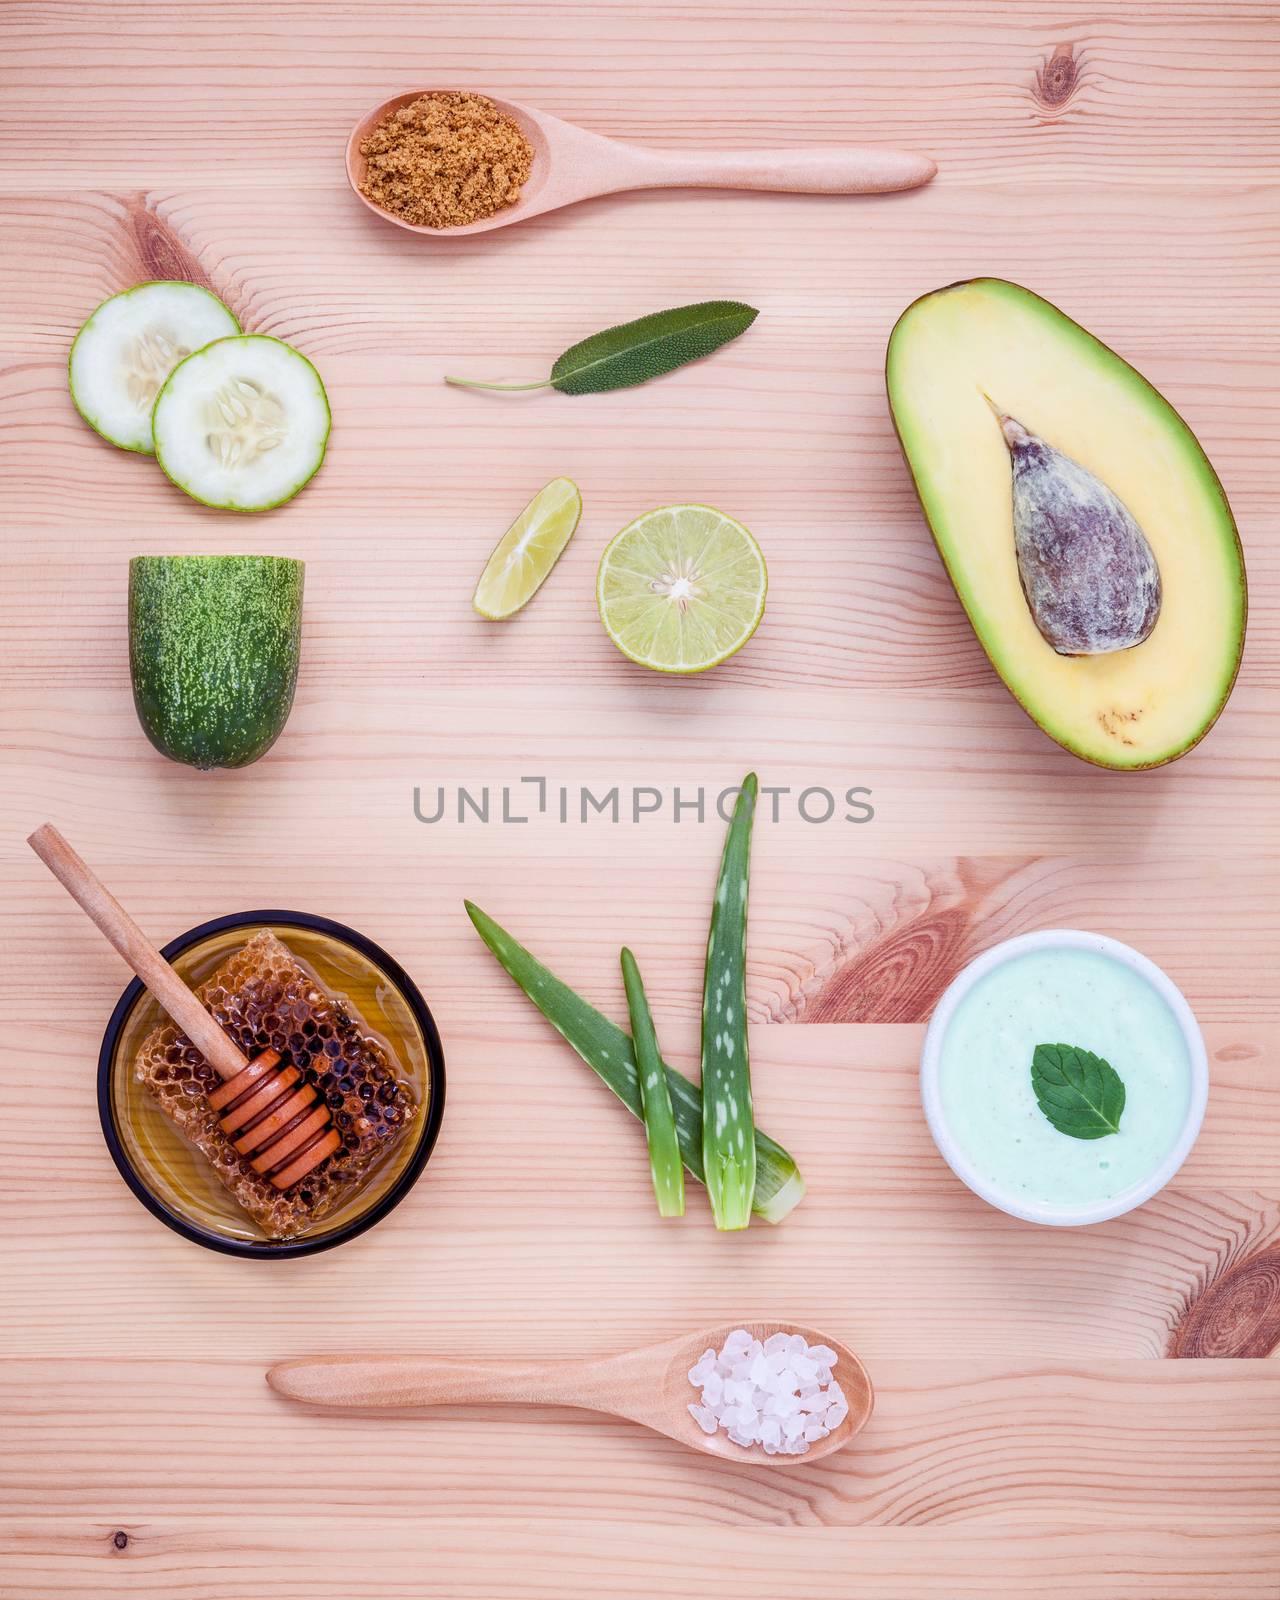 Homemade skin care and body scrub with natural ingredients avocado ,aloe vera ,lemon,cucumber and honey set up on wooden background.